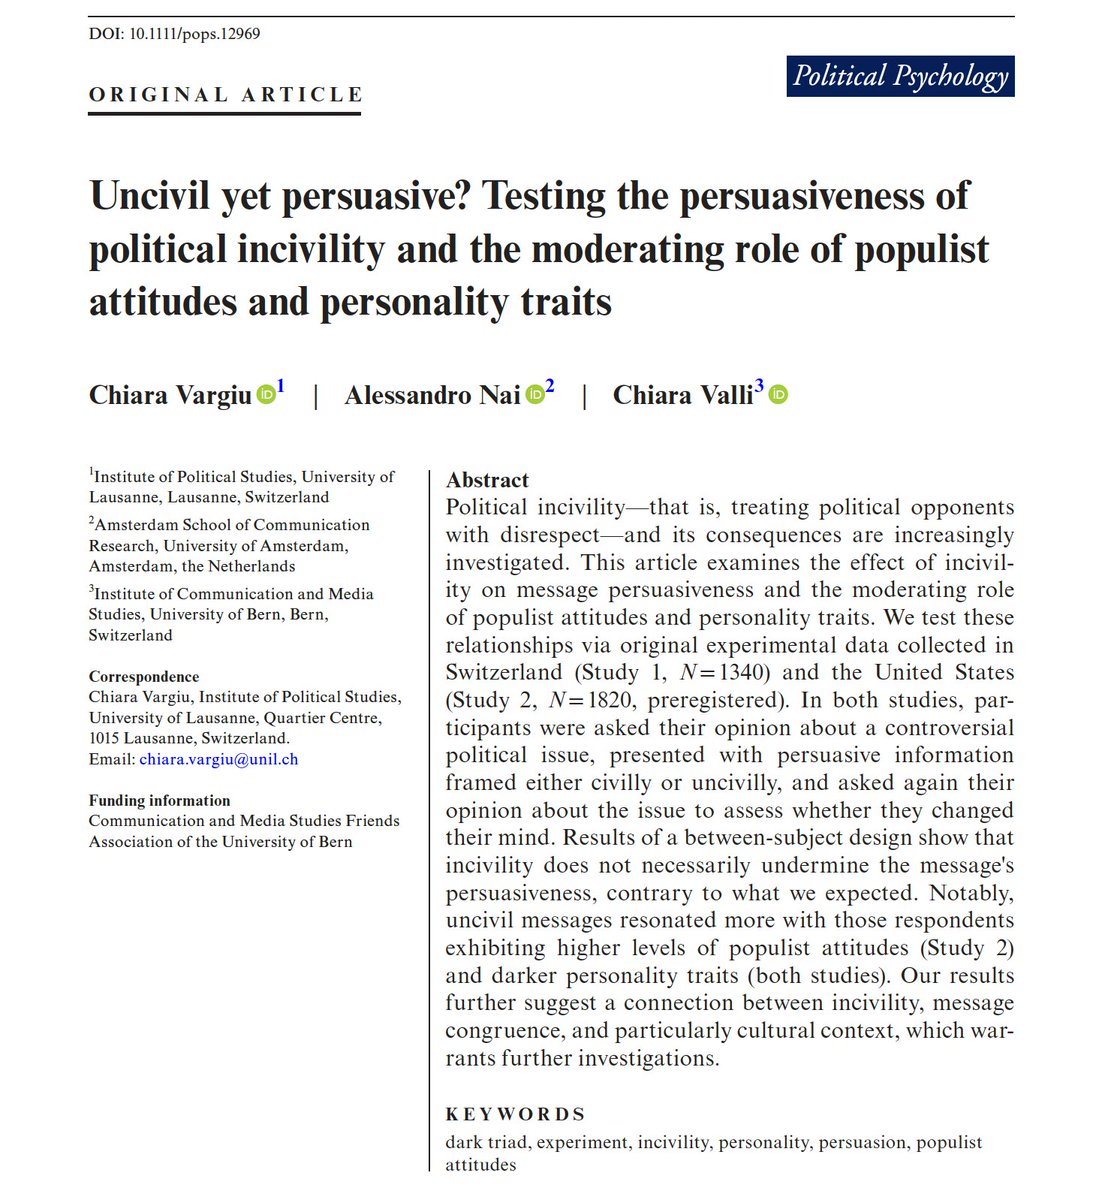 🚨New paper out at @Journal_PoPs with dream team @chiara_vargiu @chiaralisavalli Experiments in🇨🇭🇺🇸 show that incivility can be persuasive... ... especially for more aggressive ppl (high populism, dark personality) ➡️osf.io/e28xh/ Open data: osf.io/e28xh/